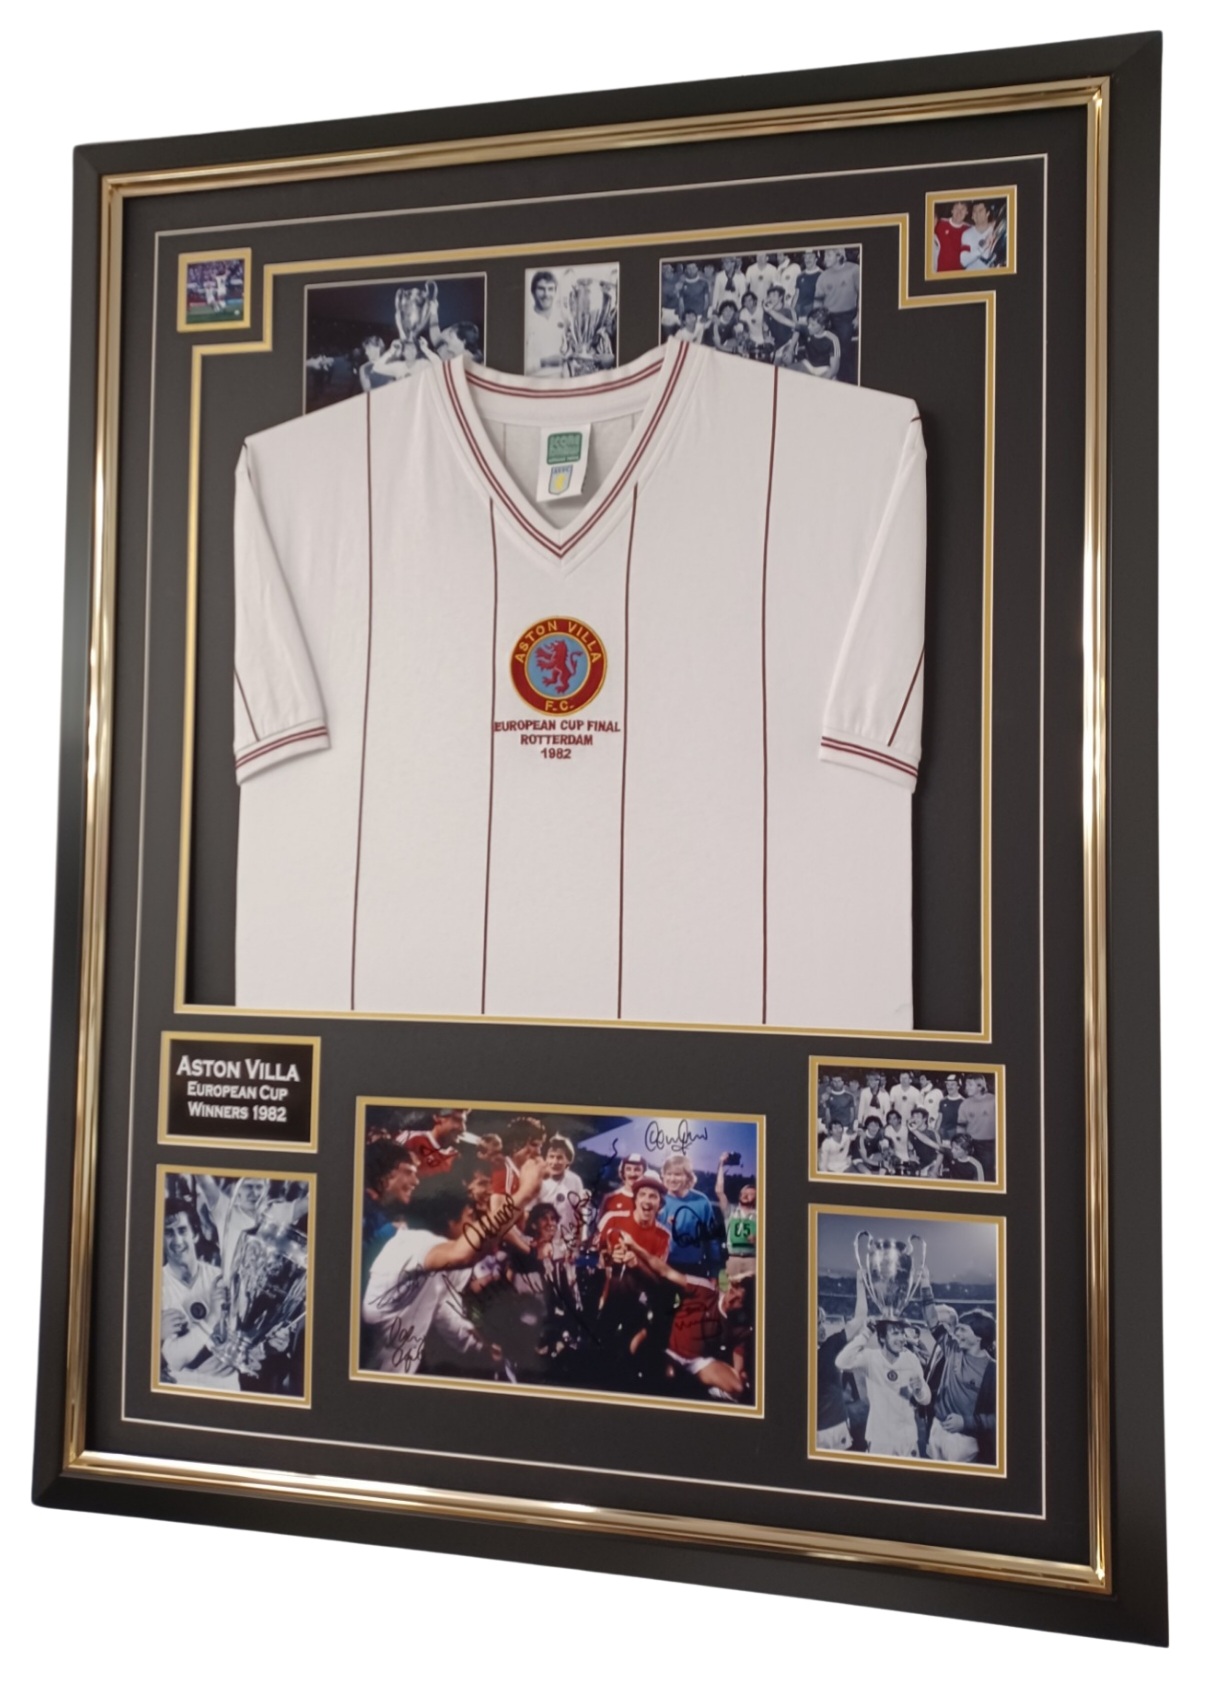 ASTON VILLA 1982 SIGNED PICTURE AND SHIRT